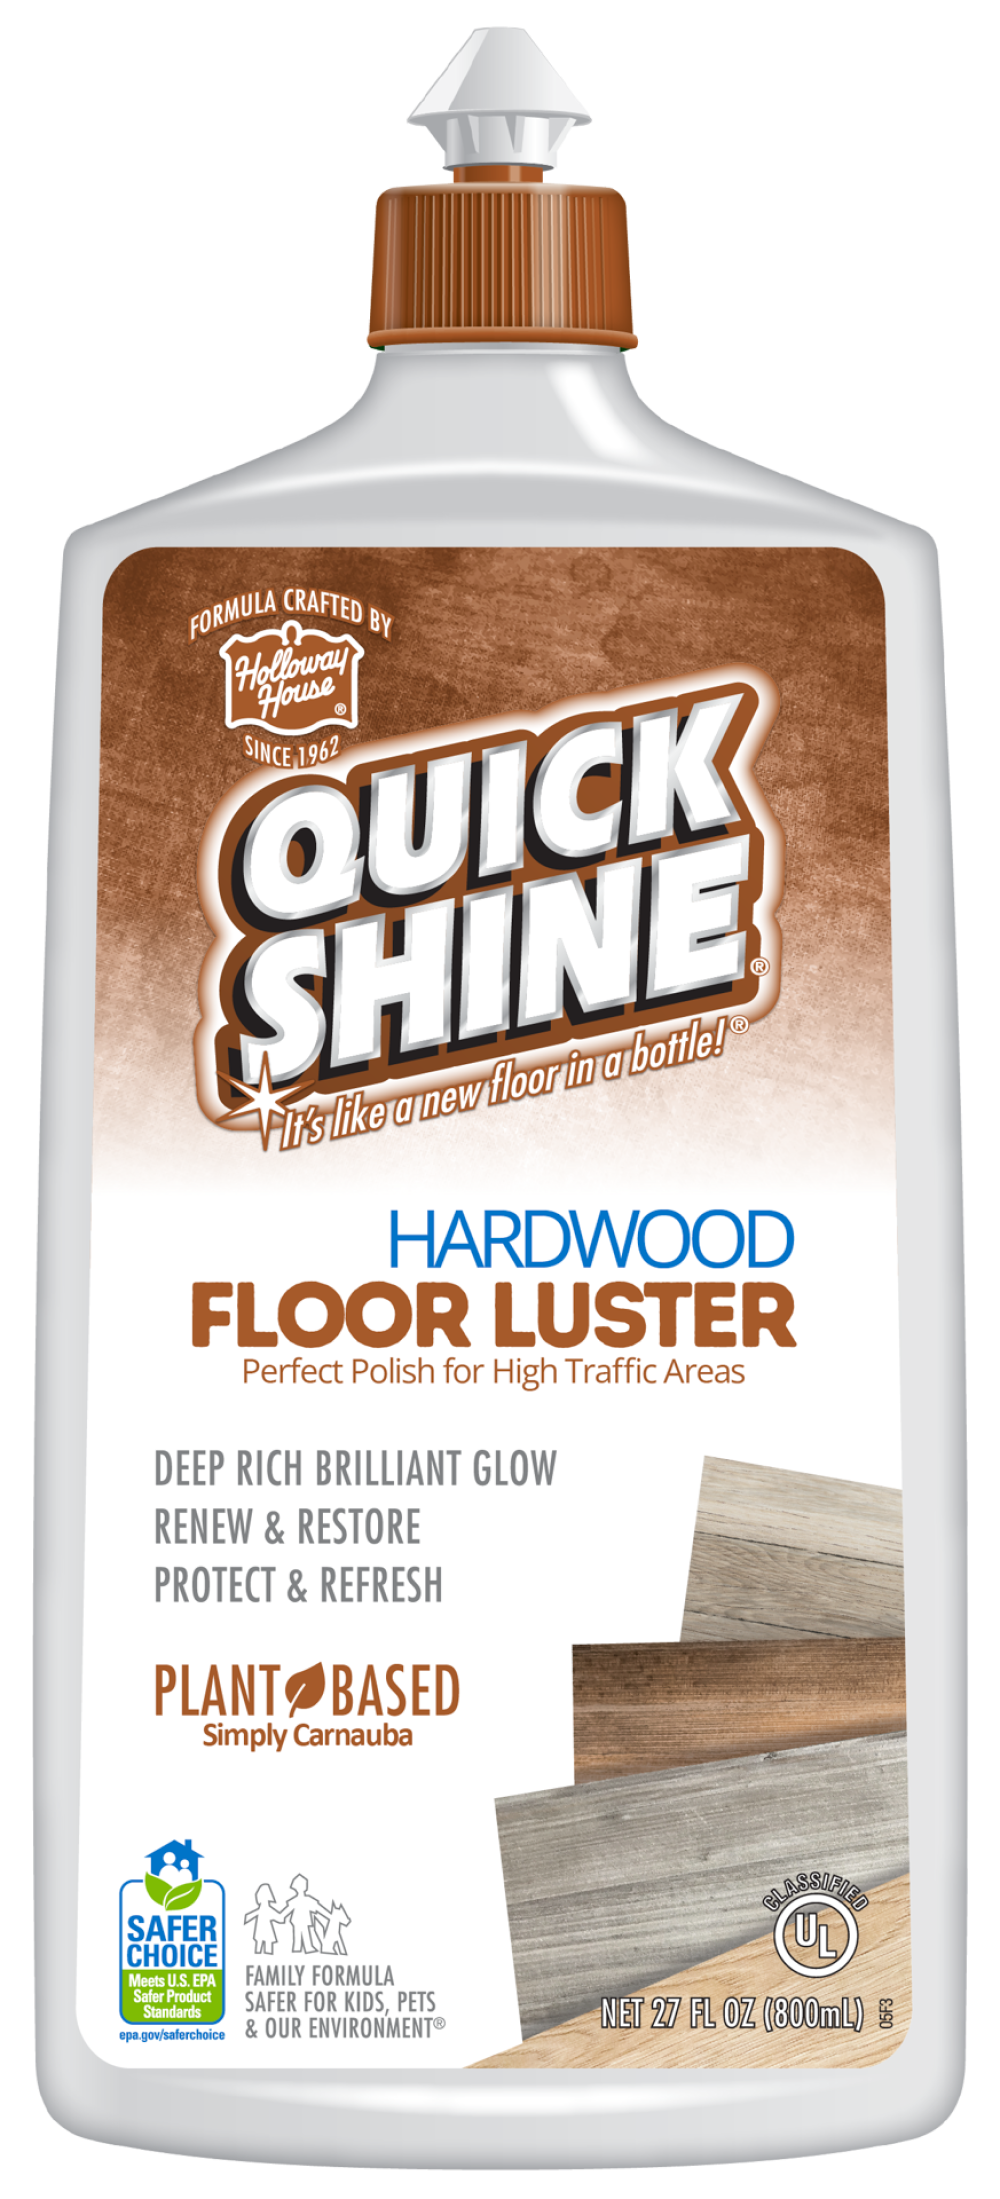 Quick Shine Hardwood Floor Luster 64oz, Plant-Based Cleaner & Polish w  Carnauba, Simply Squirt & Spread, Don't Refinish It, Quick Shine It, Safer Choice Cleaner